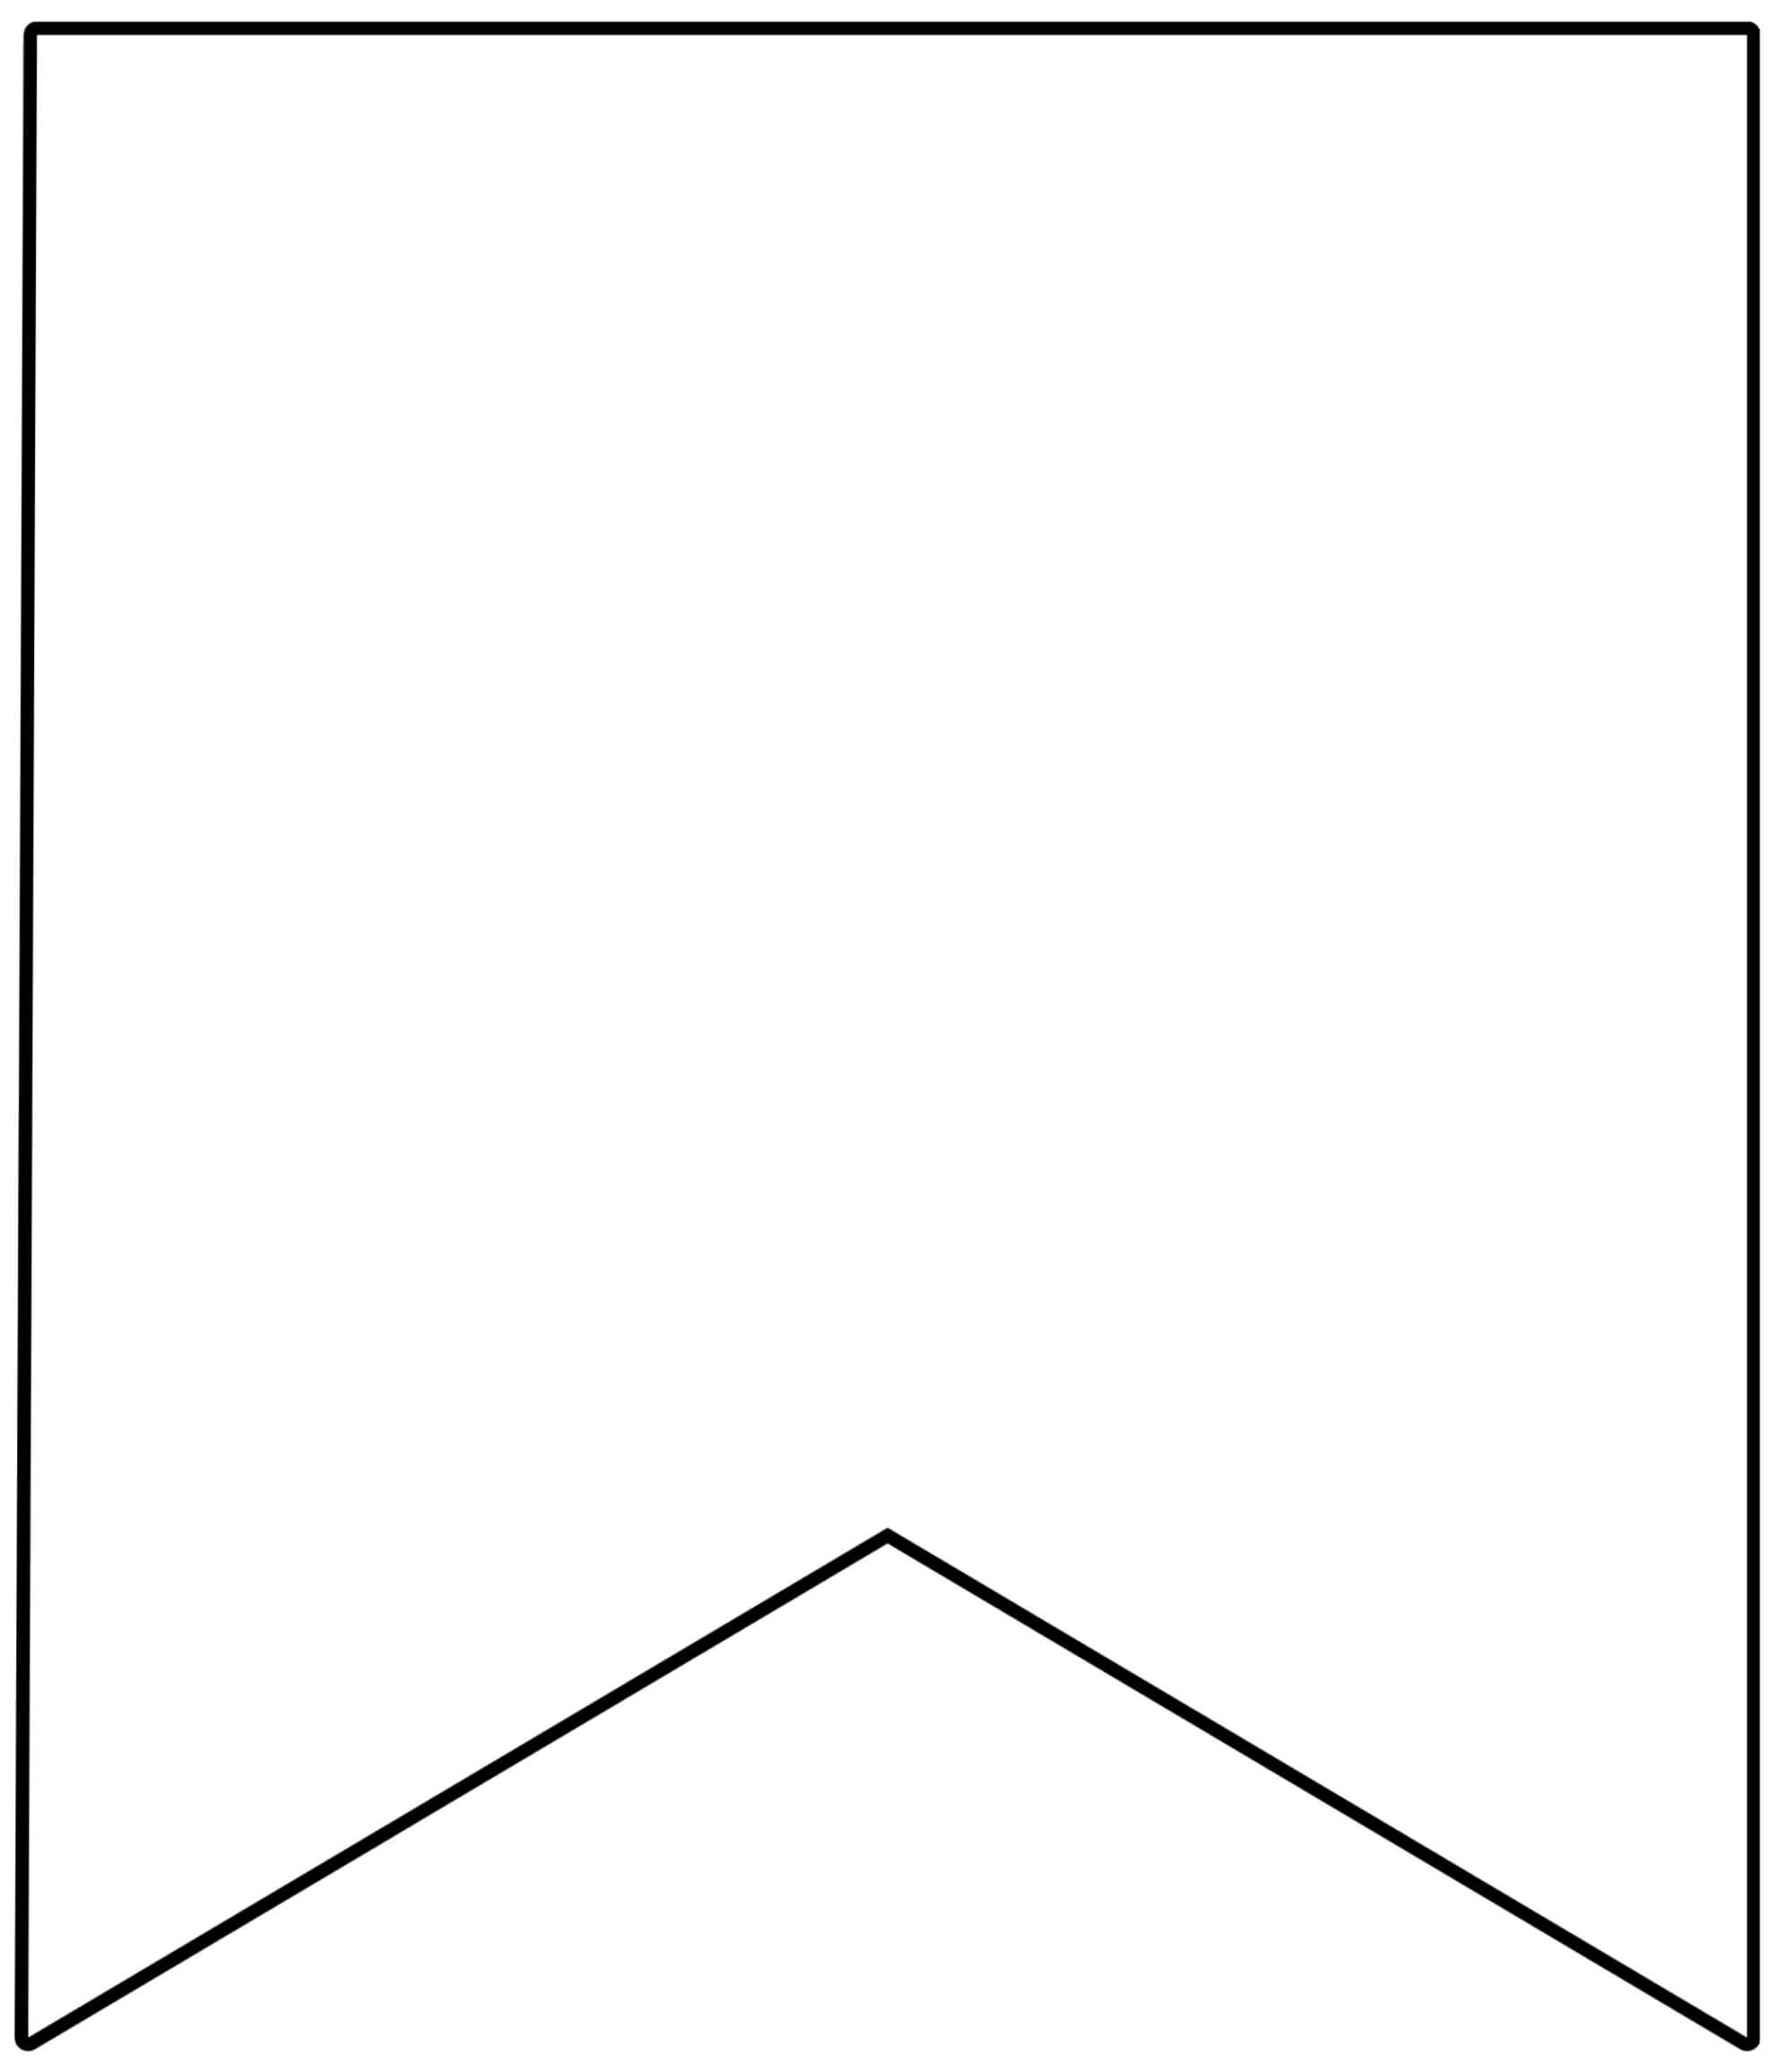 Free Printable Banner Templates {Blank Banners} - Paper For Free Triangle Banner Template